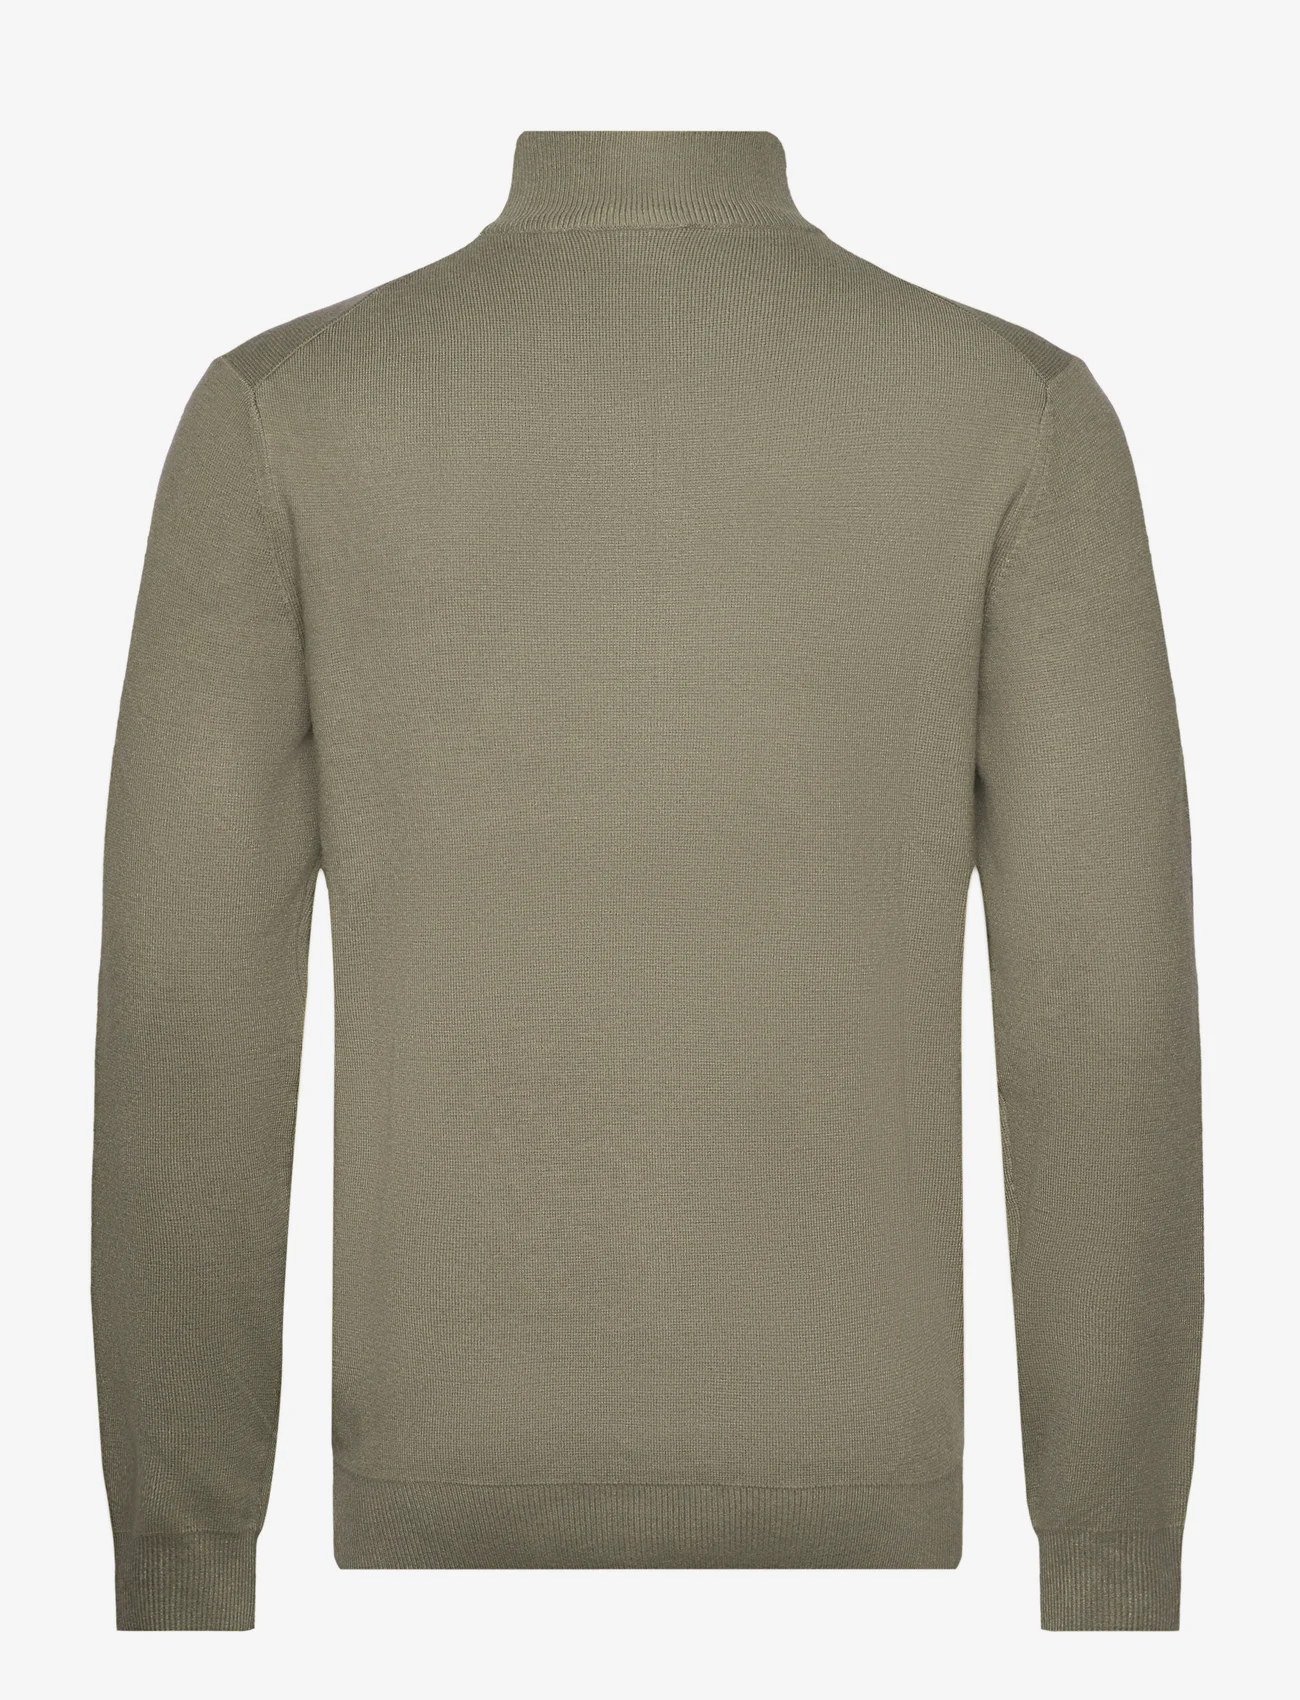 Lindbergh - Ecovero half zip knit - nordisk style - army - 1